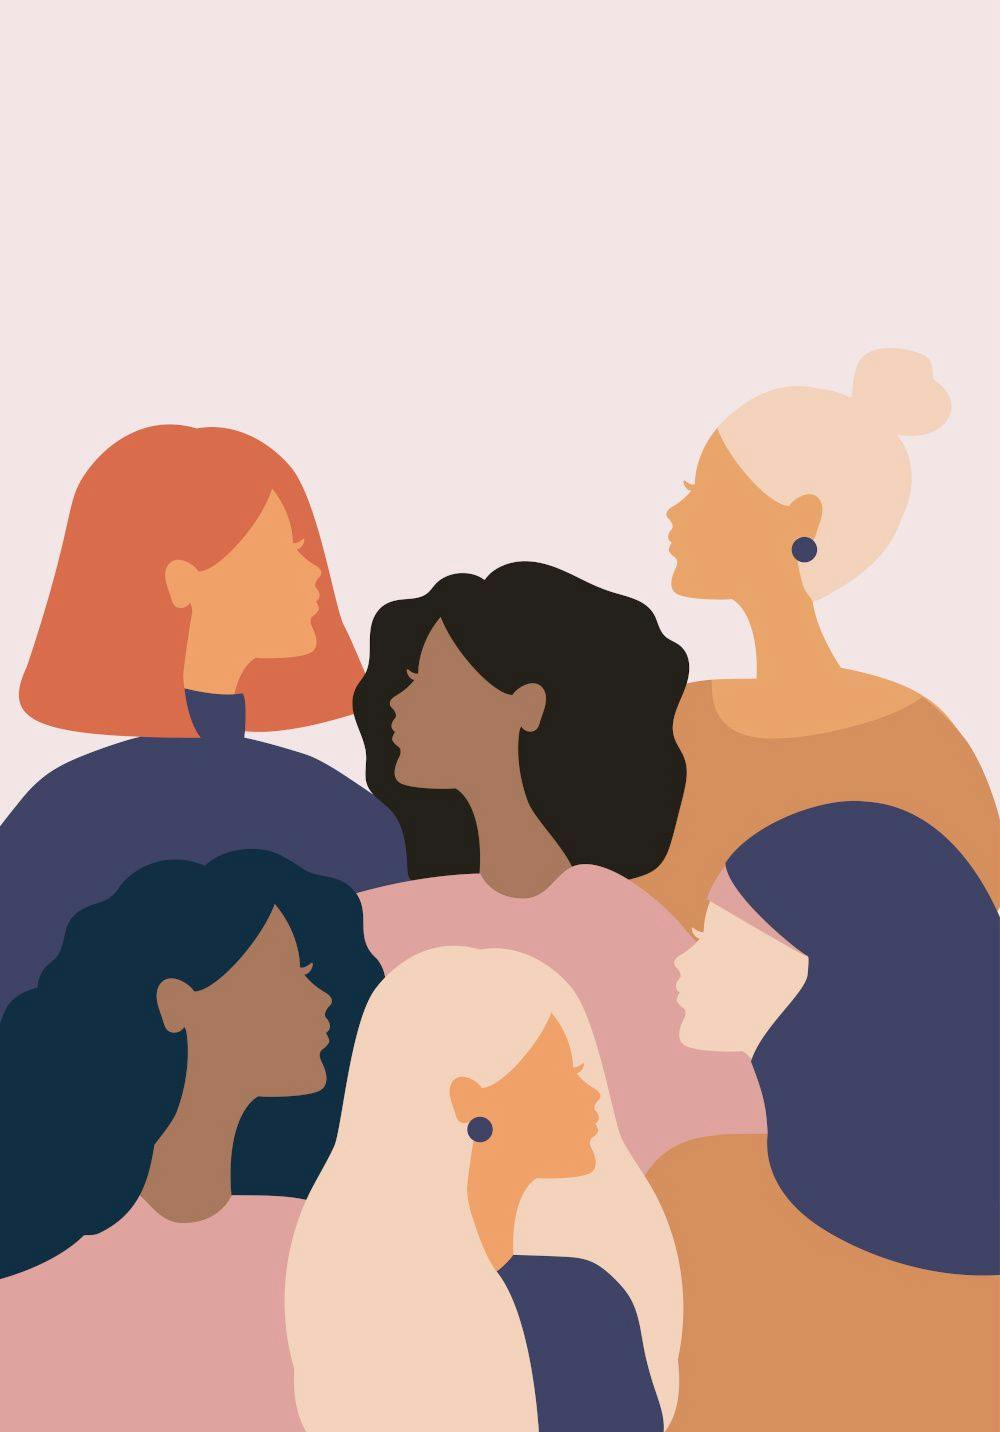 illustration of diverse group of women in silhouette